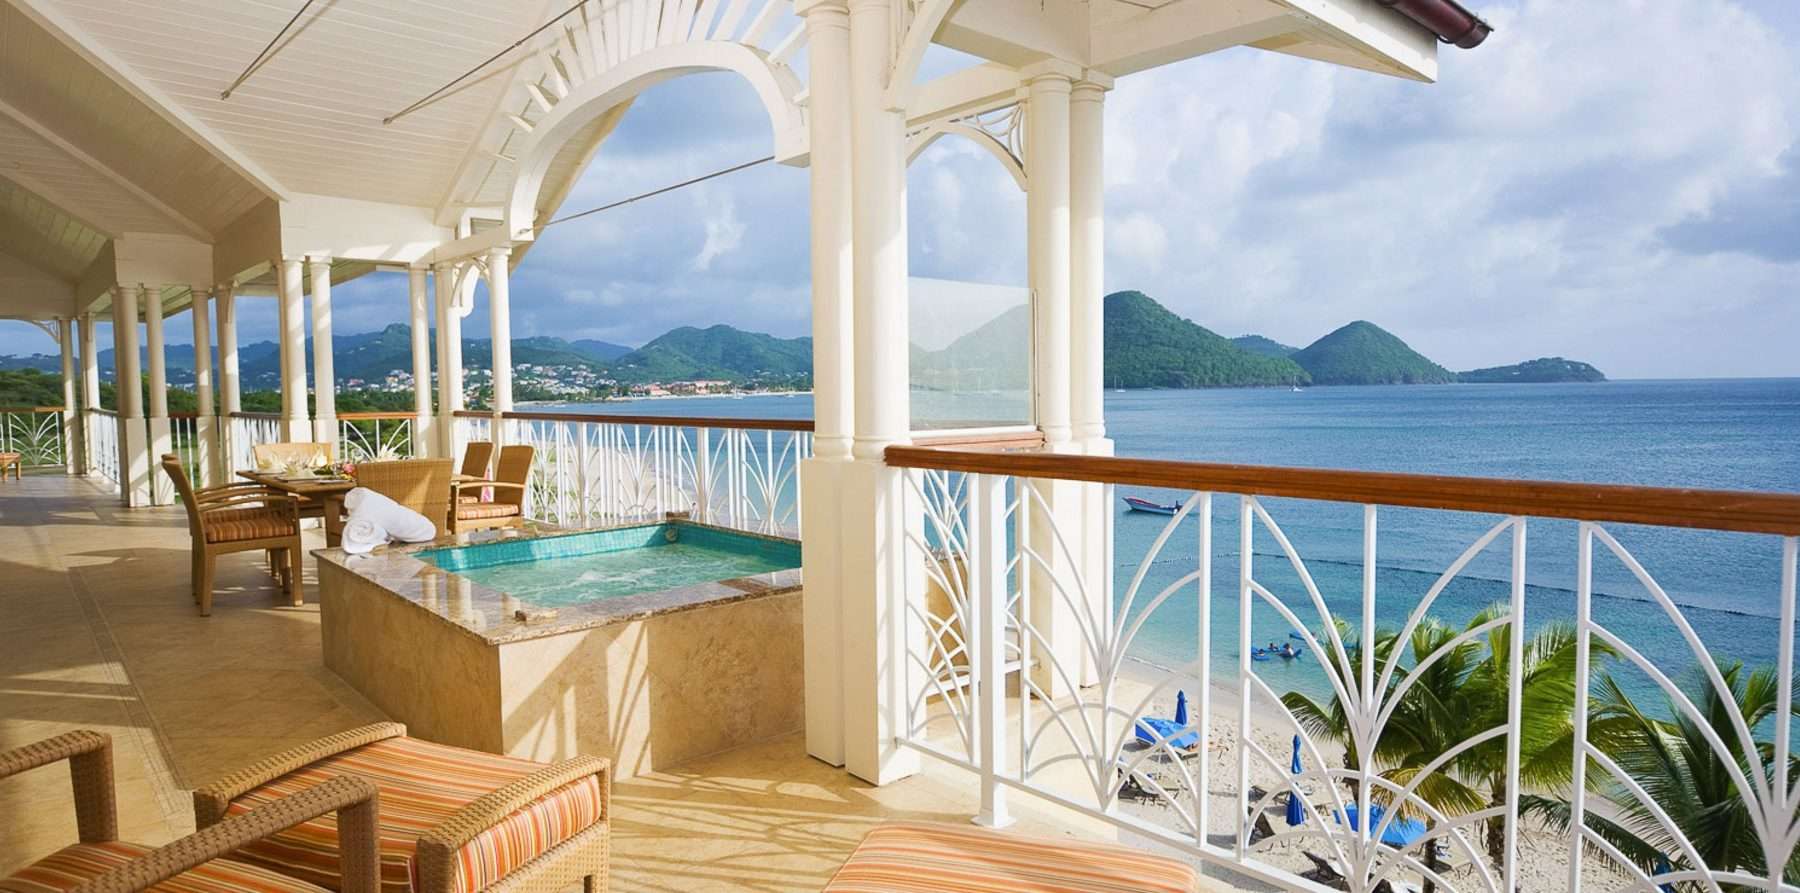 The Landings St Lucia Offer Pool and Ocean view